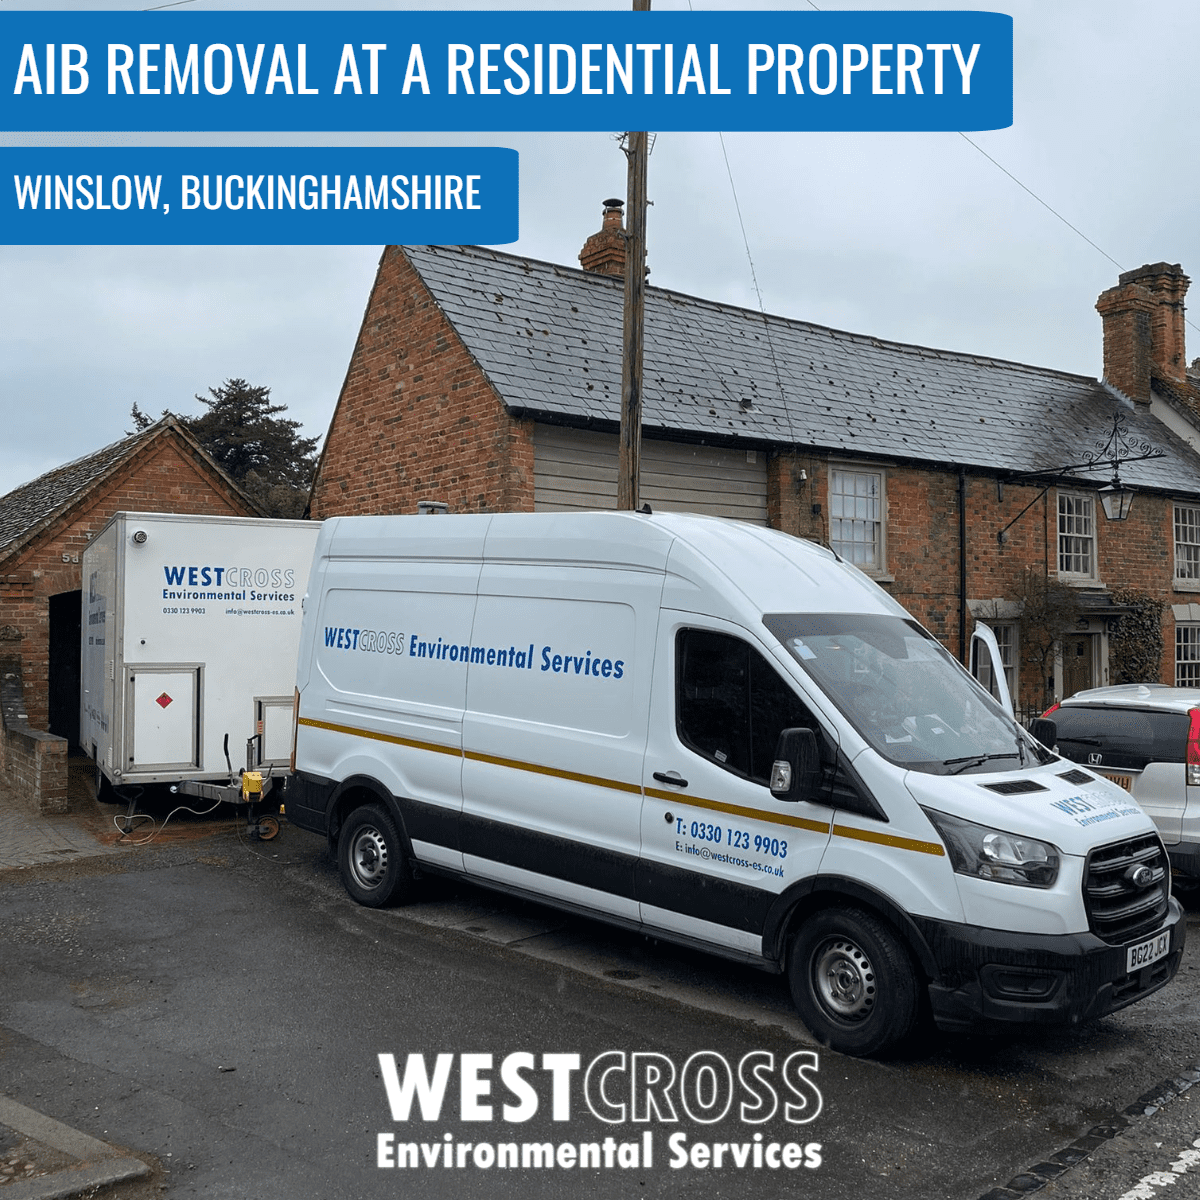 AIB removal at a residential property